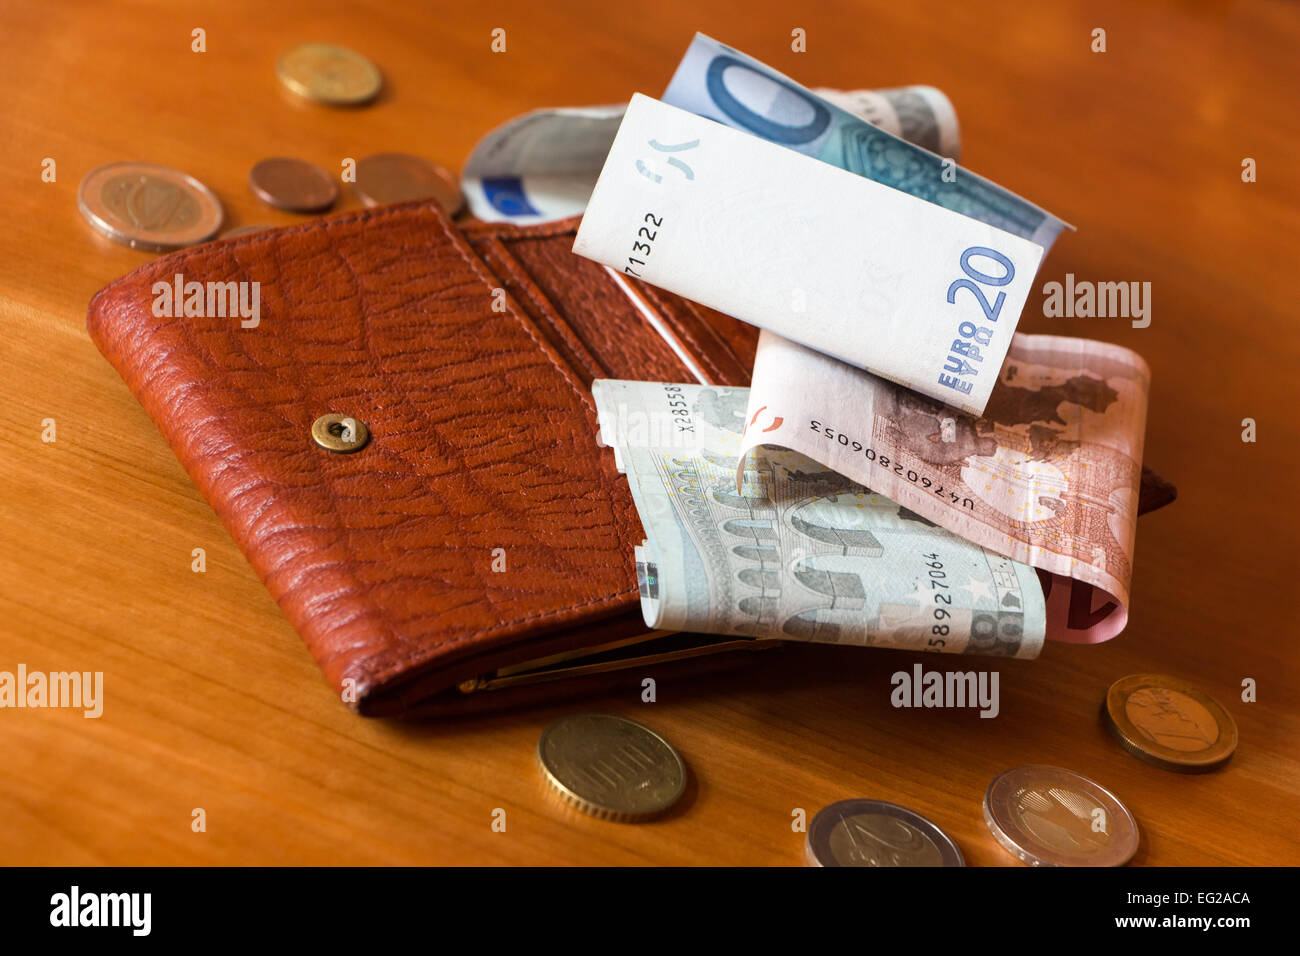 Wallet and some money scattered on a wooden table Stock Photo